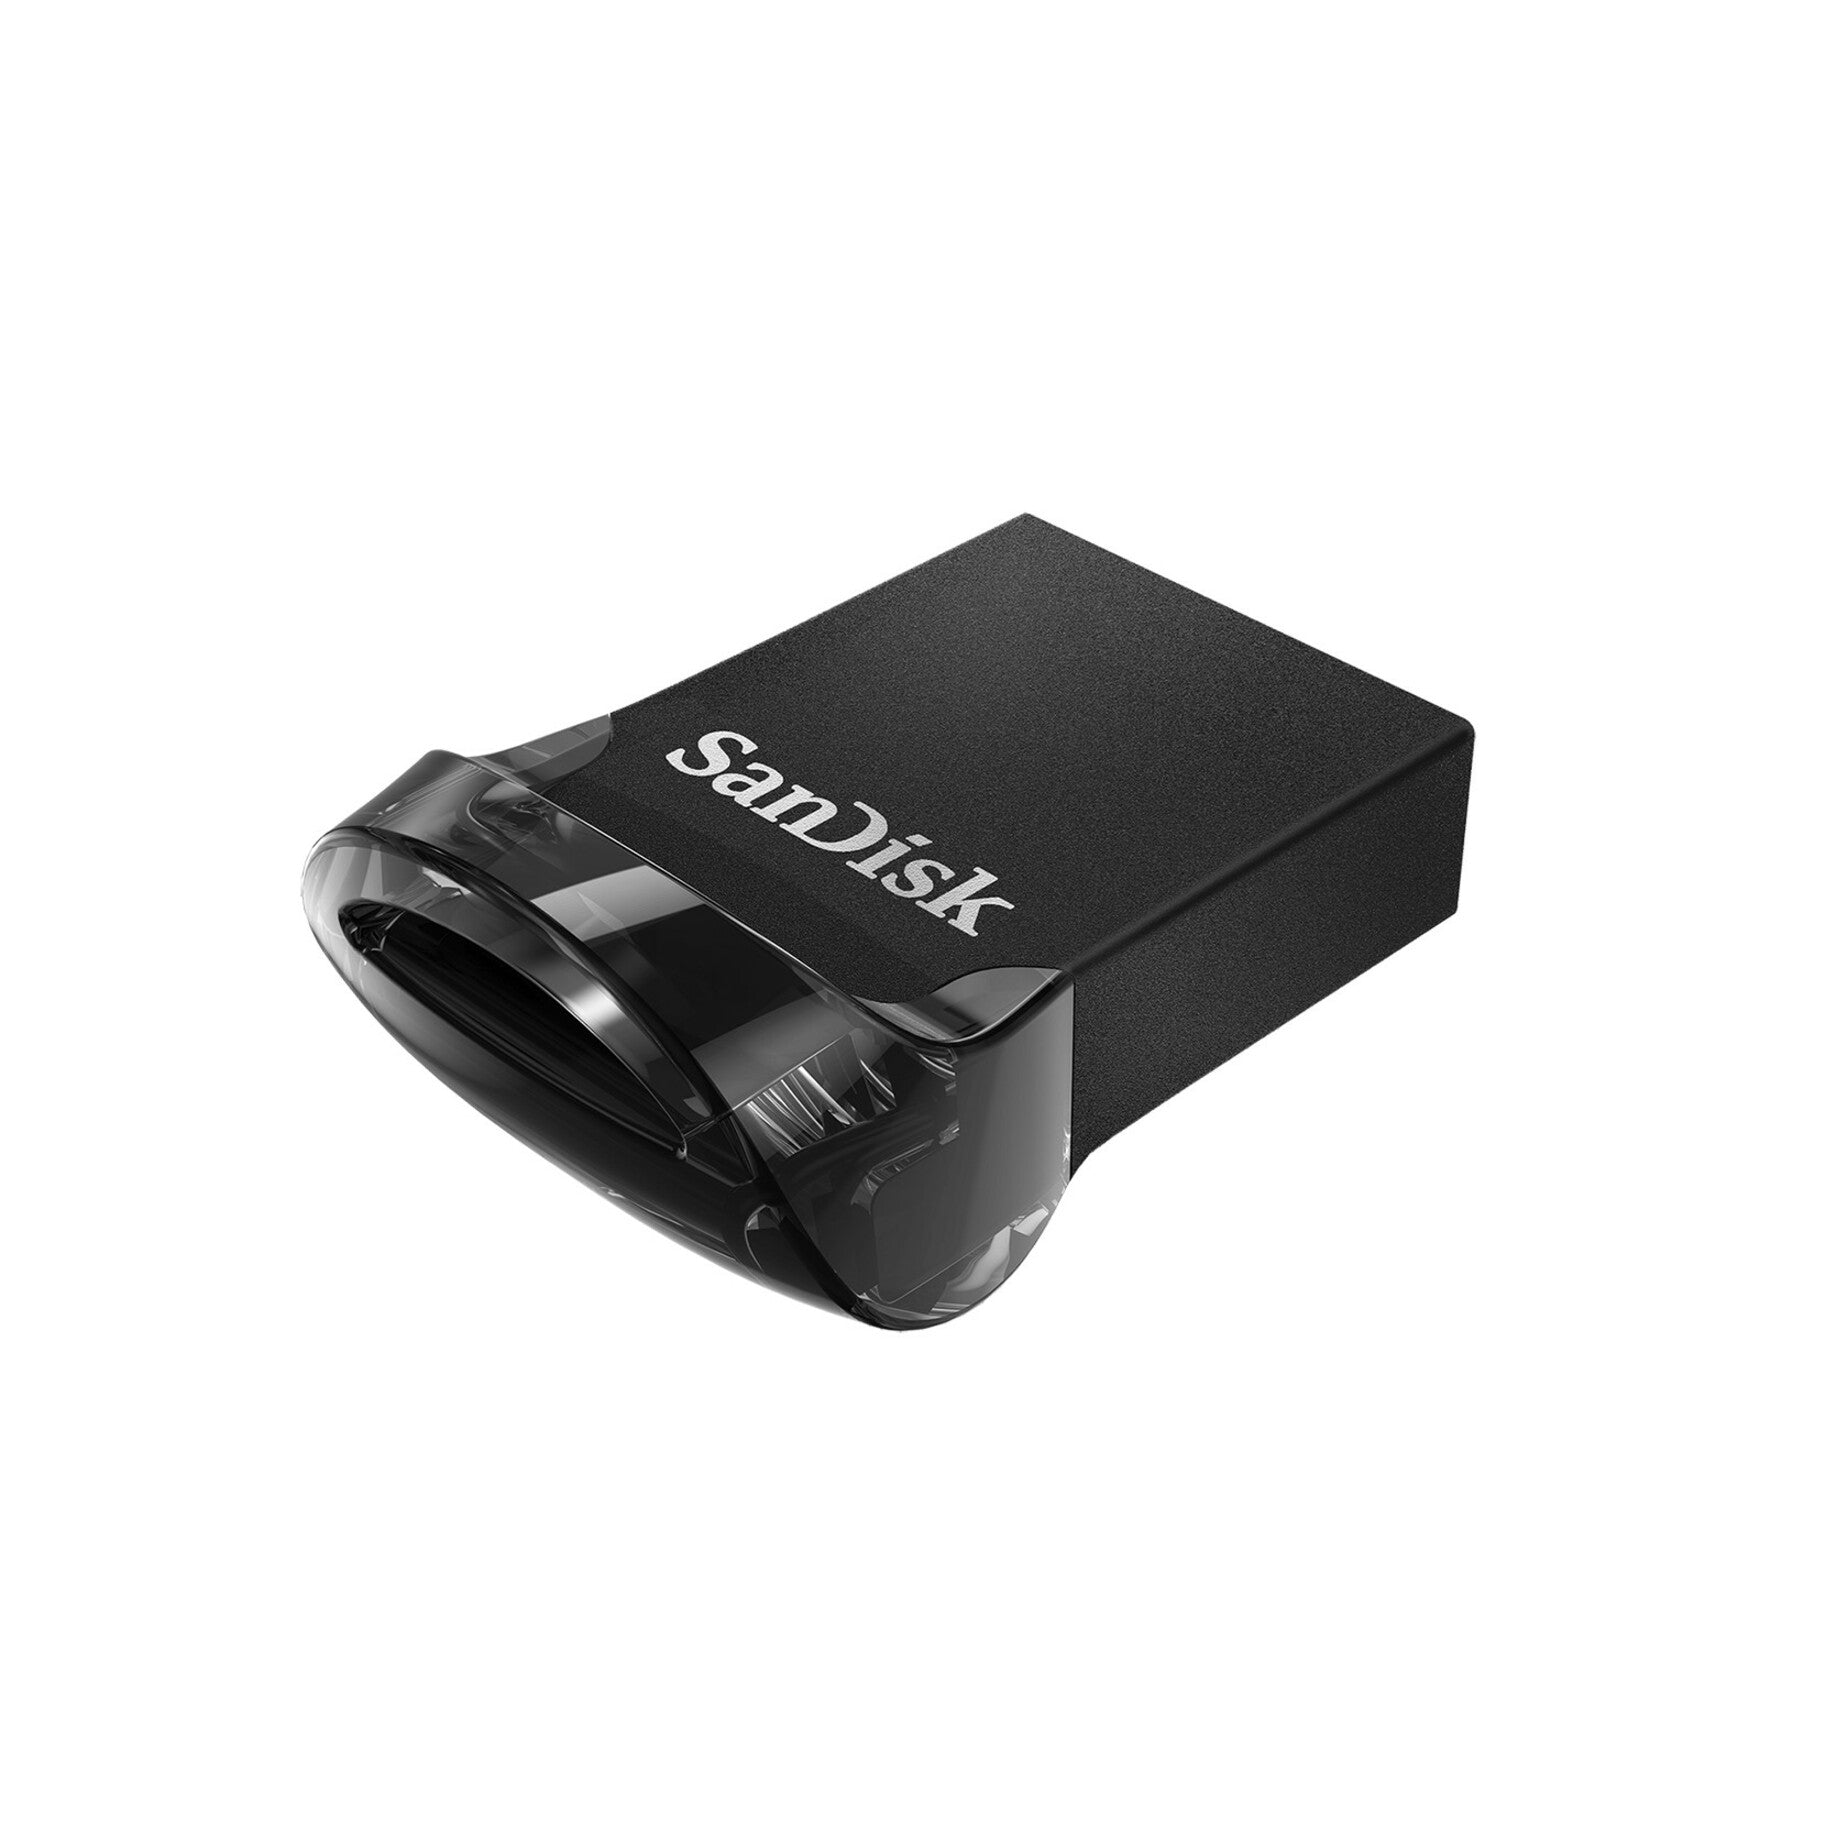 SanDisk SDCZ430-032G-A46 Ultra Fit USB 3.1 Flash Drive 32GB, High-Speed Data Transfer and Compact Design